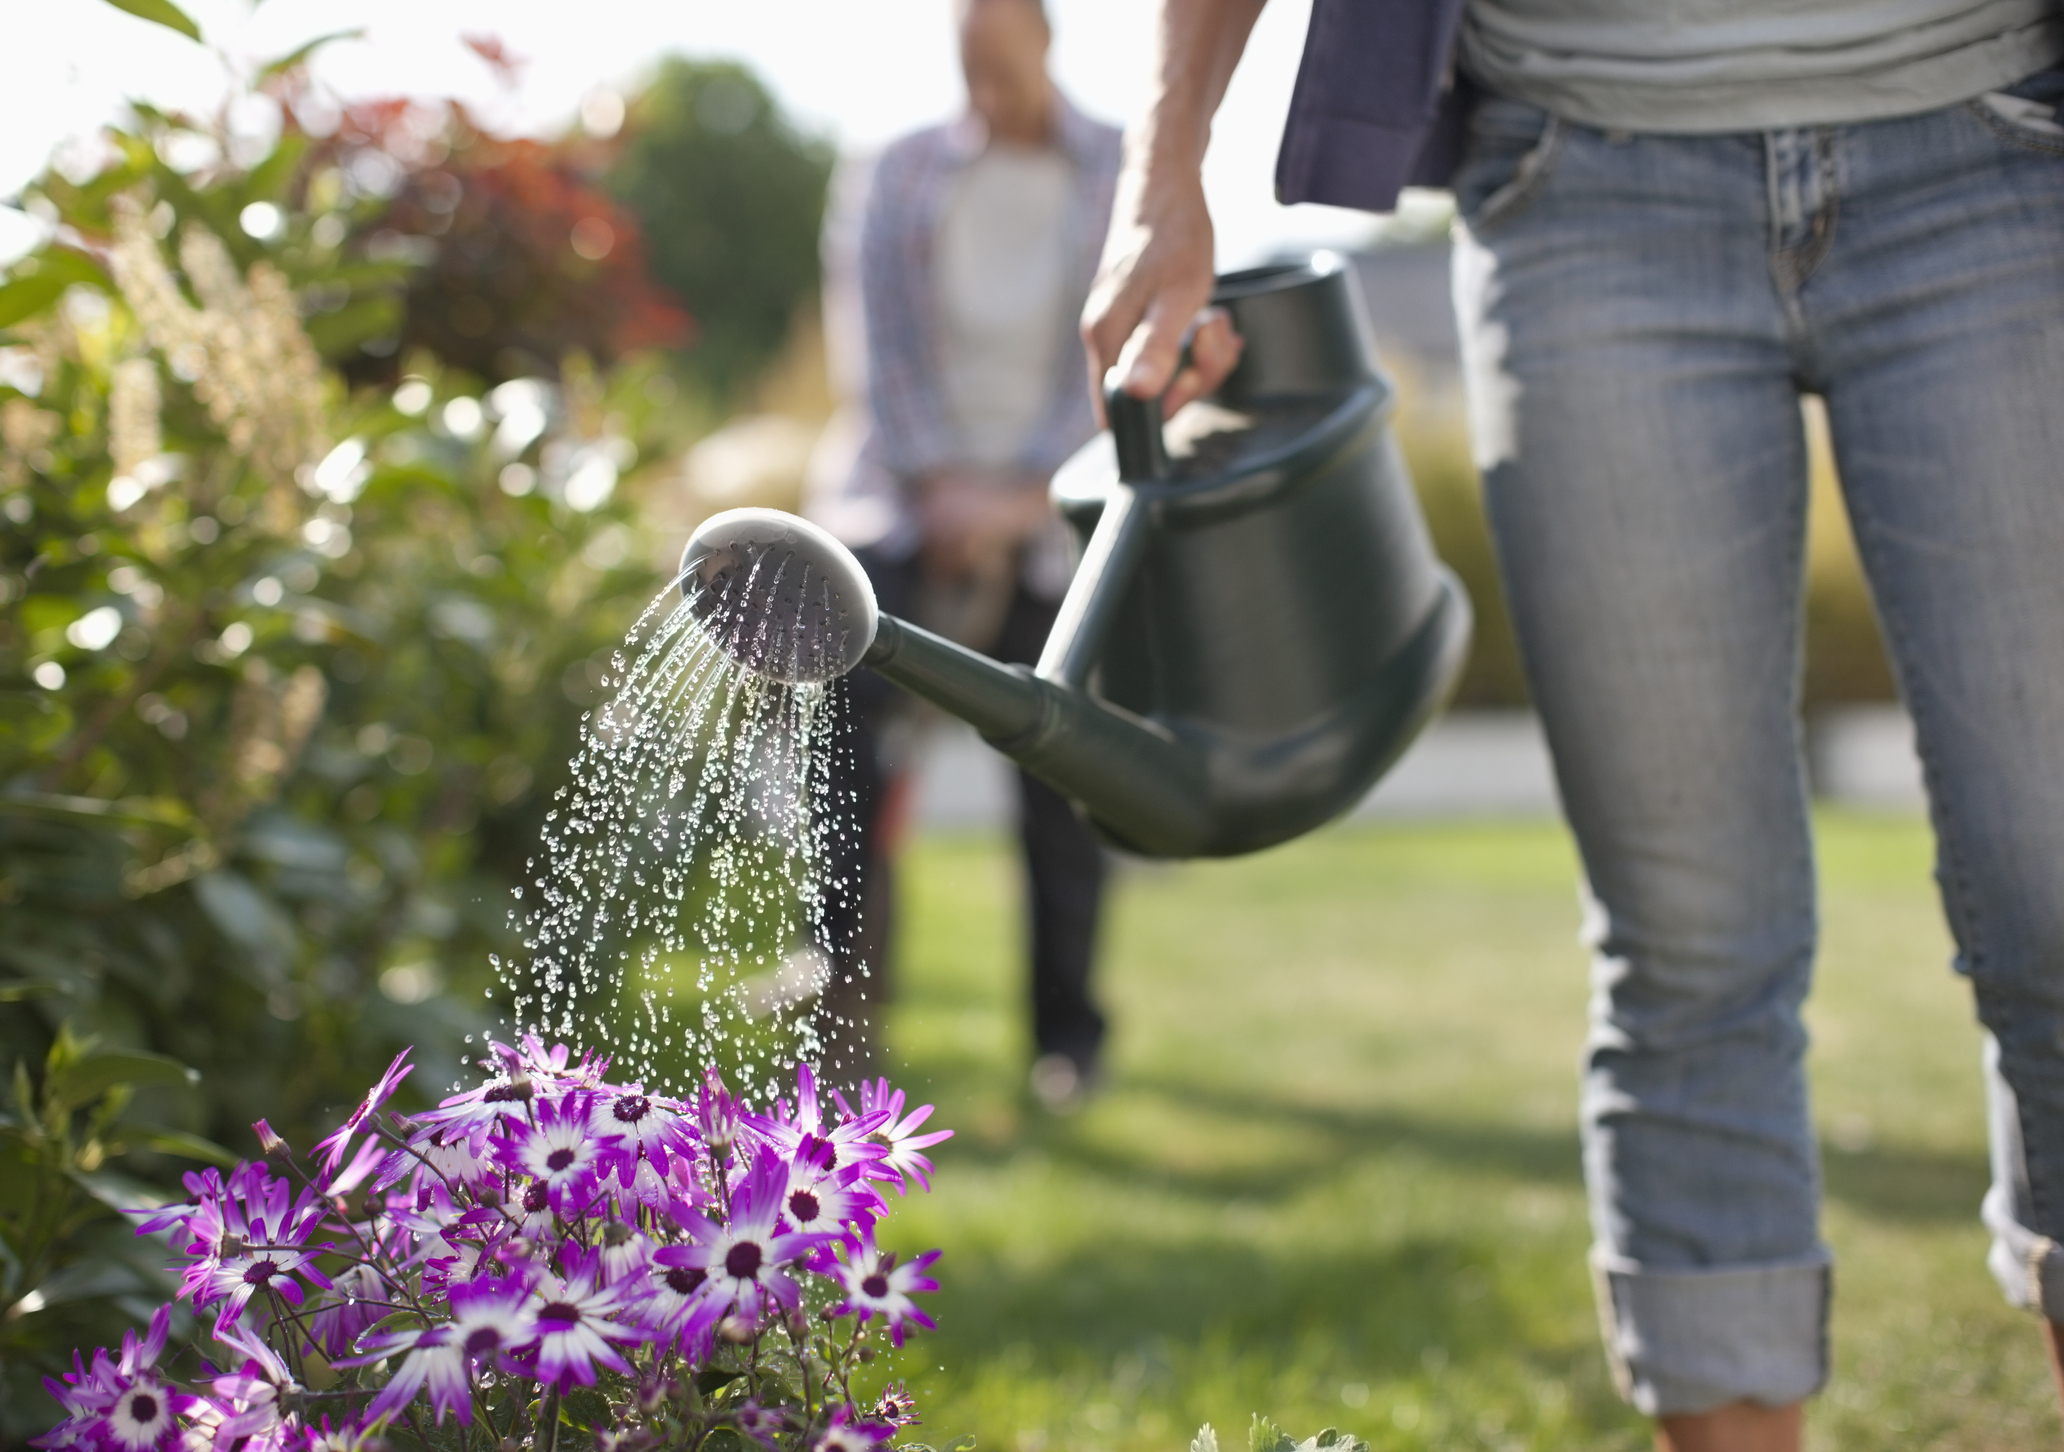 How to get your garden ready for summer